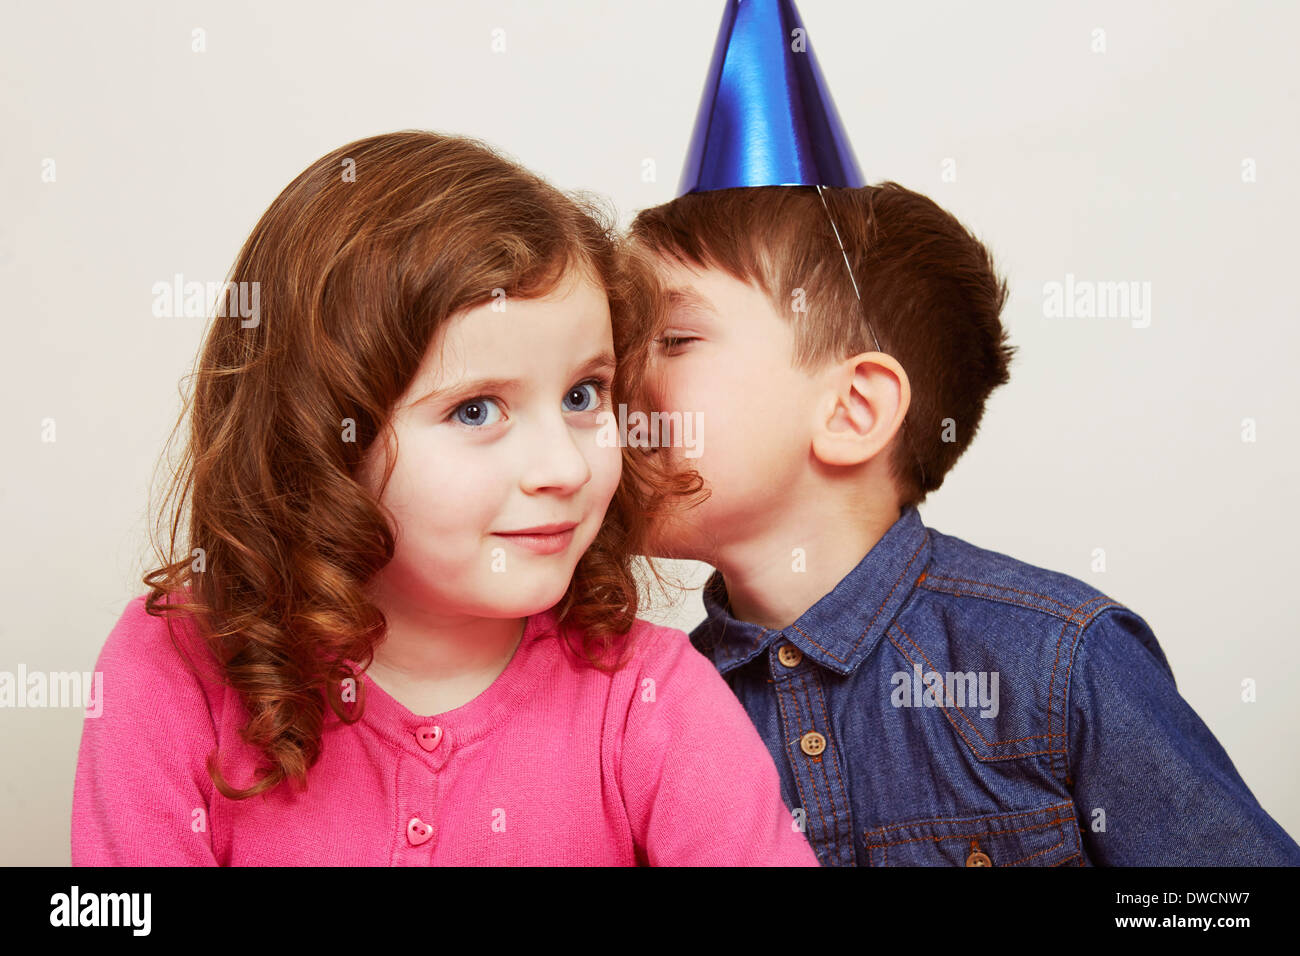 Boy wearing party hat whispering to girl Stock Photo